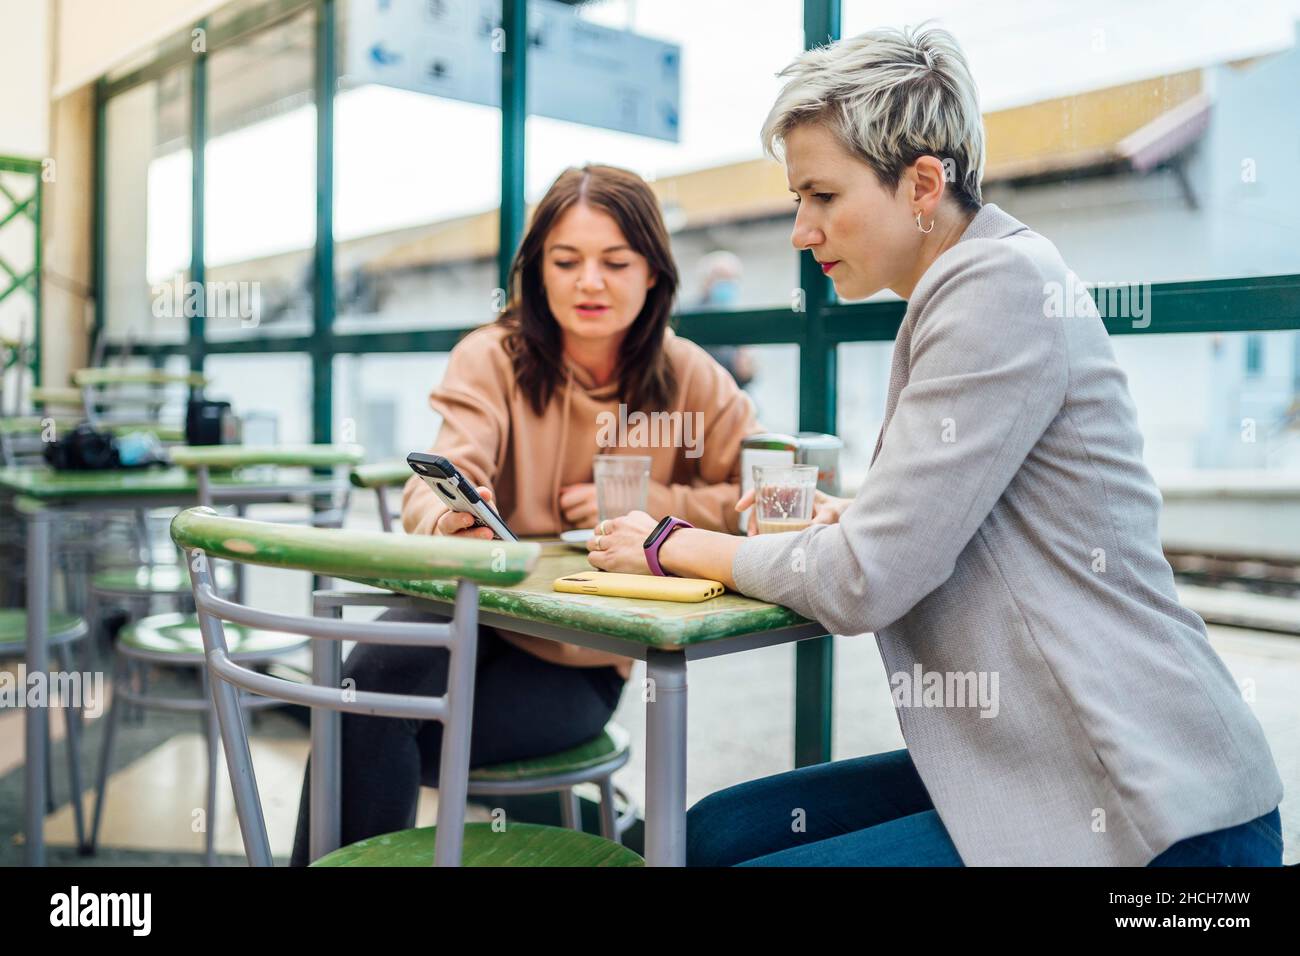 Two women chatting and showing something on the phone in the cafe at train station, Portugal Stock Photo